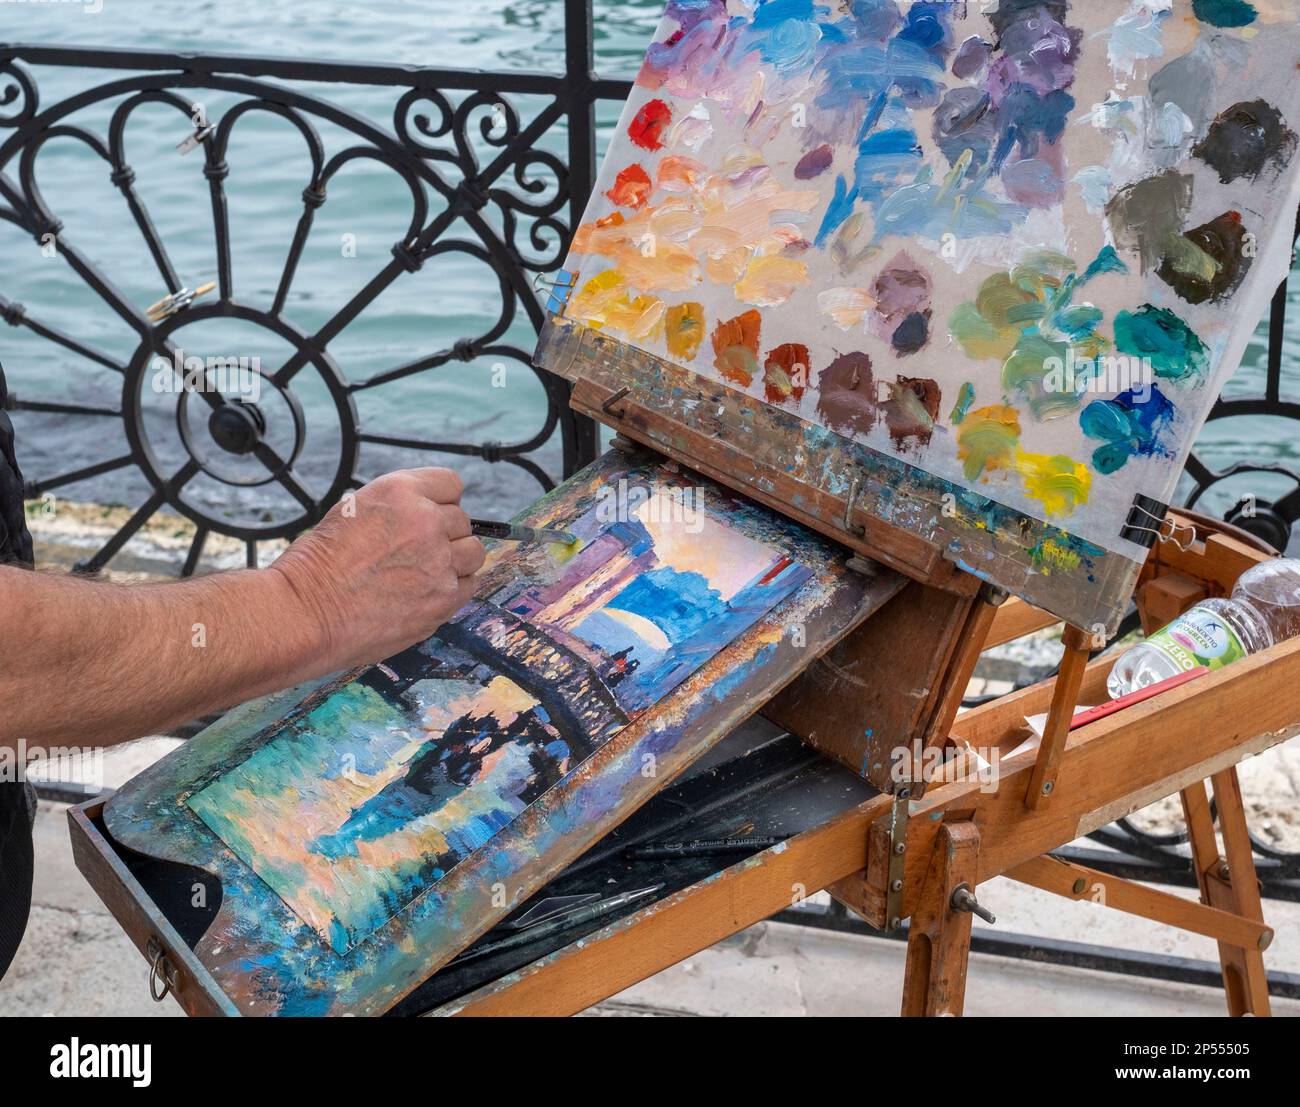 Street artists easel and paints, San Marco, Venice, Italy Stock Photo